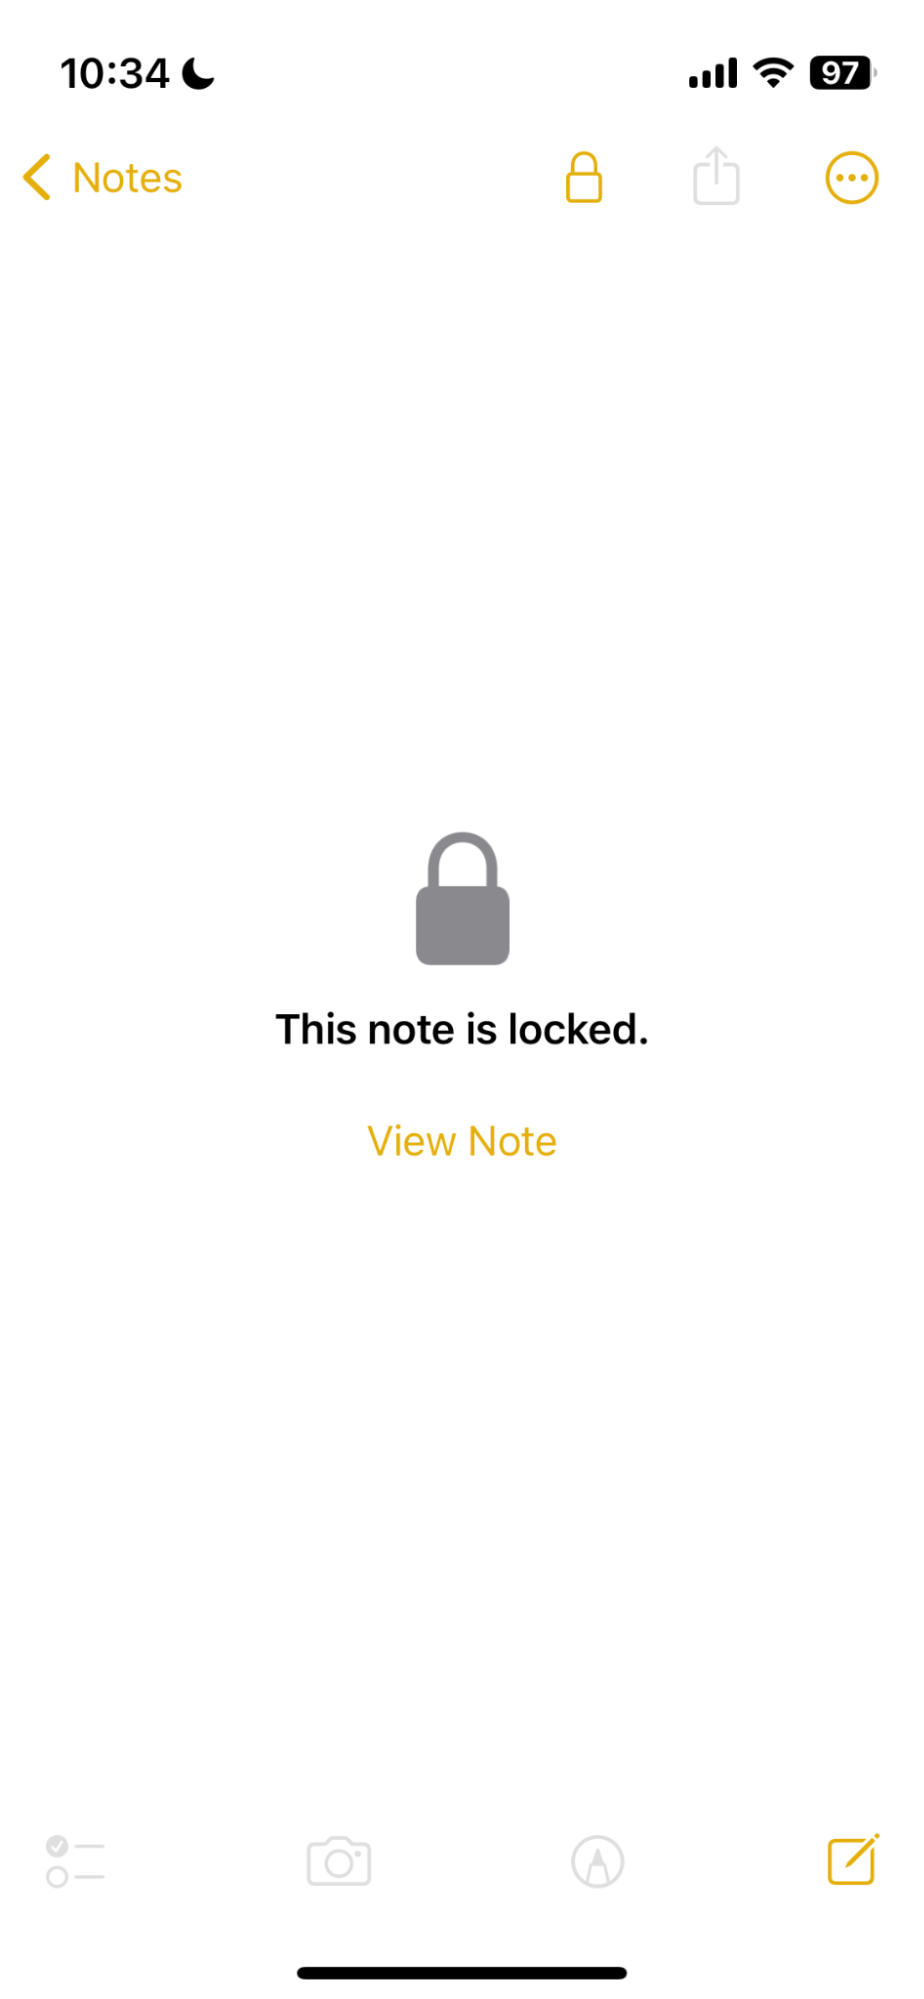 A locked note on Apple Notes